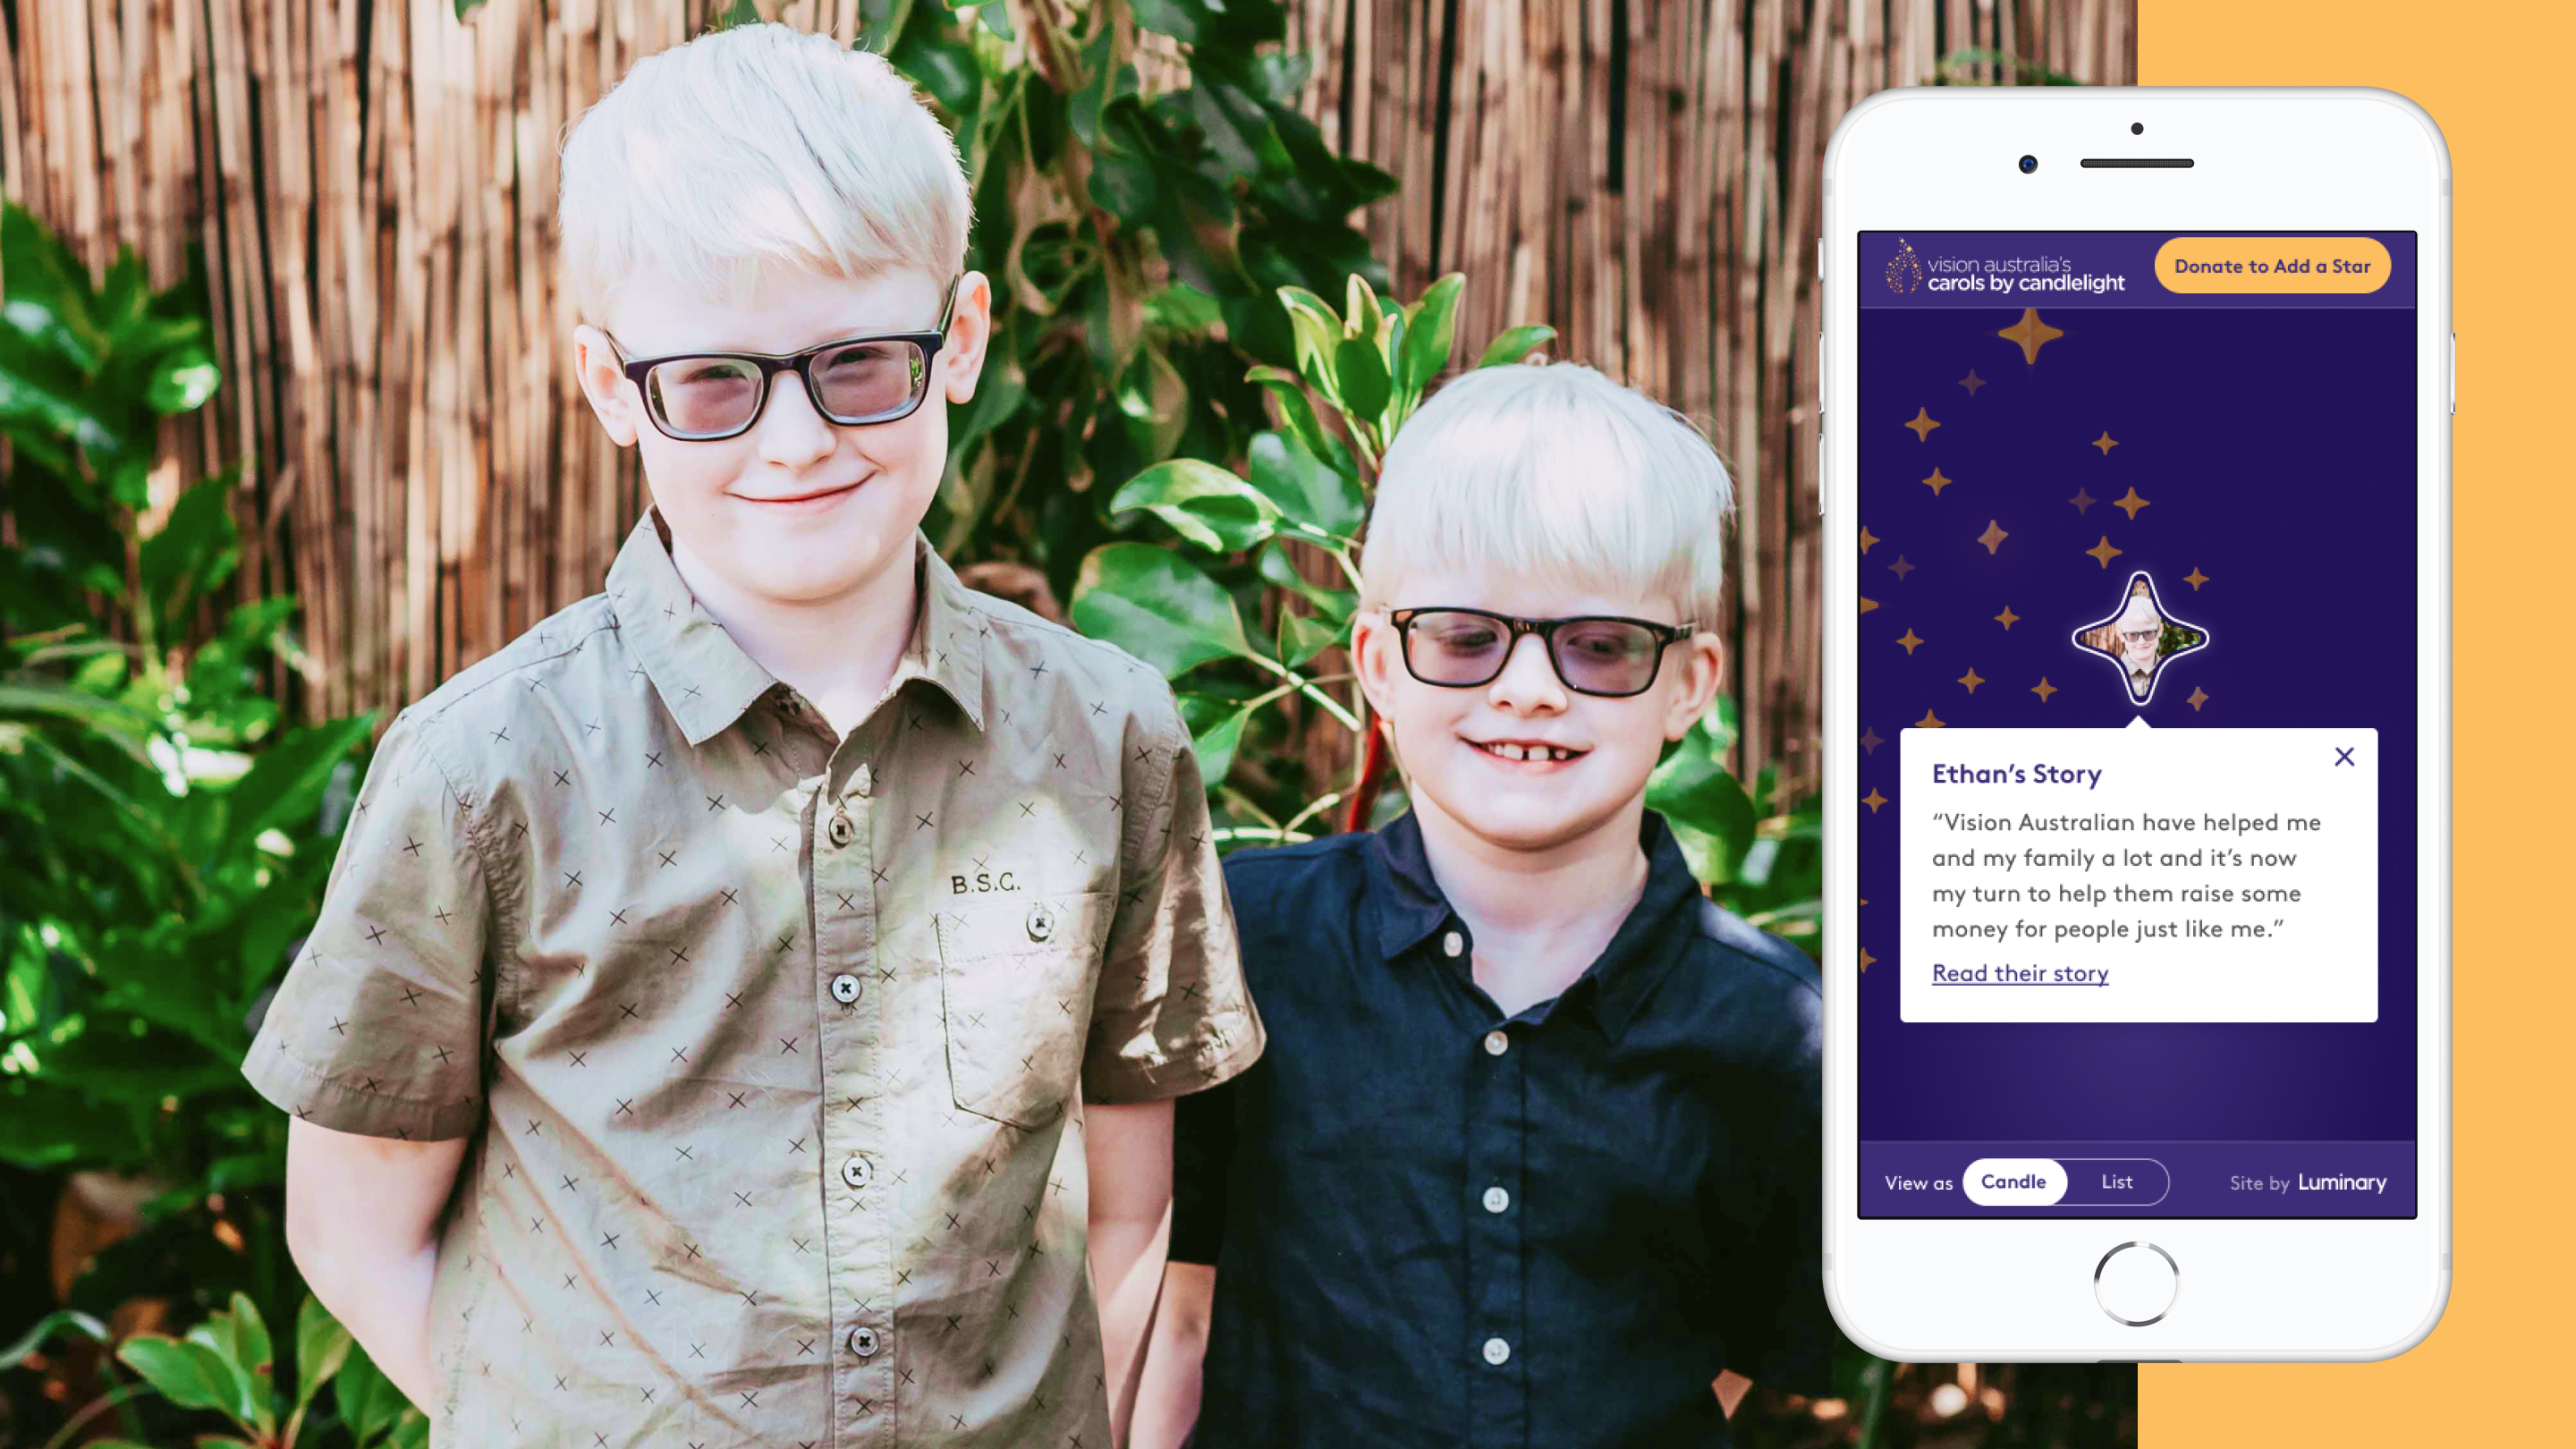 Ethan's story on the Carols by Candlelight website